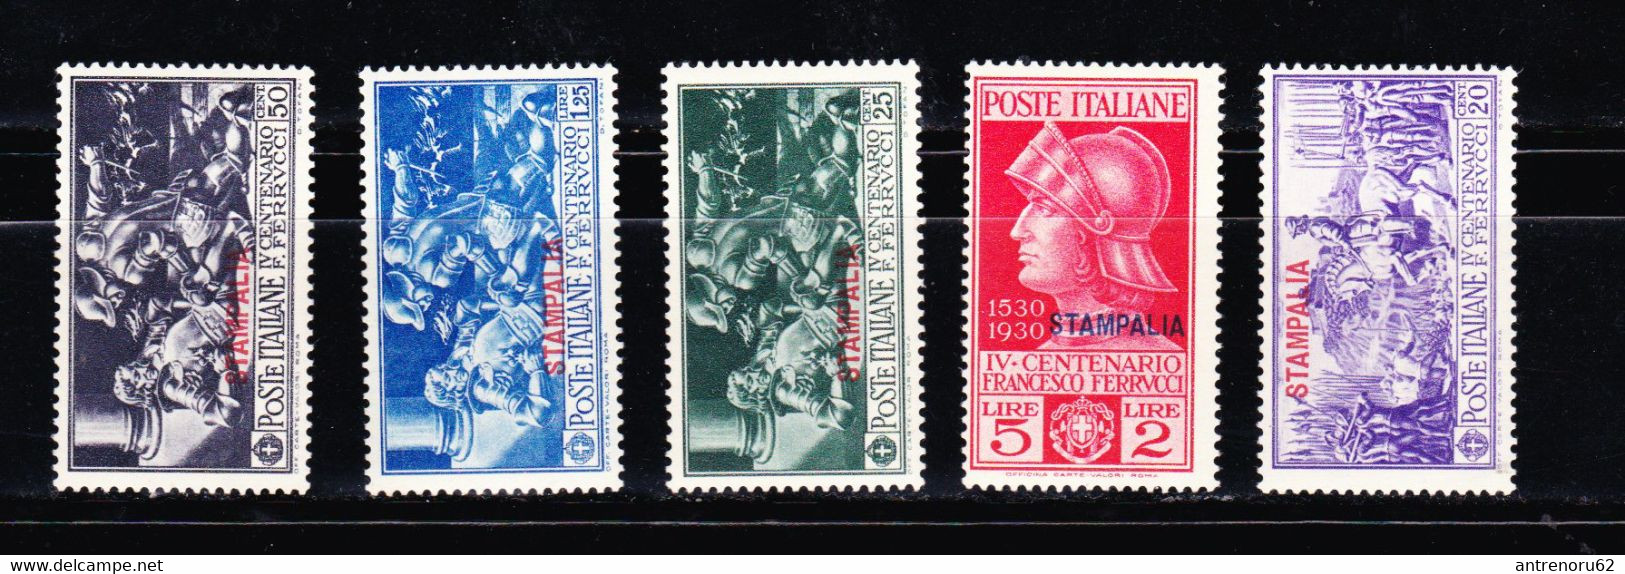 STAMPS-ITALY-STAMPALIA-1930-UNUSED-MNH**-SEE-SCAN - Egée (Stampalia)